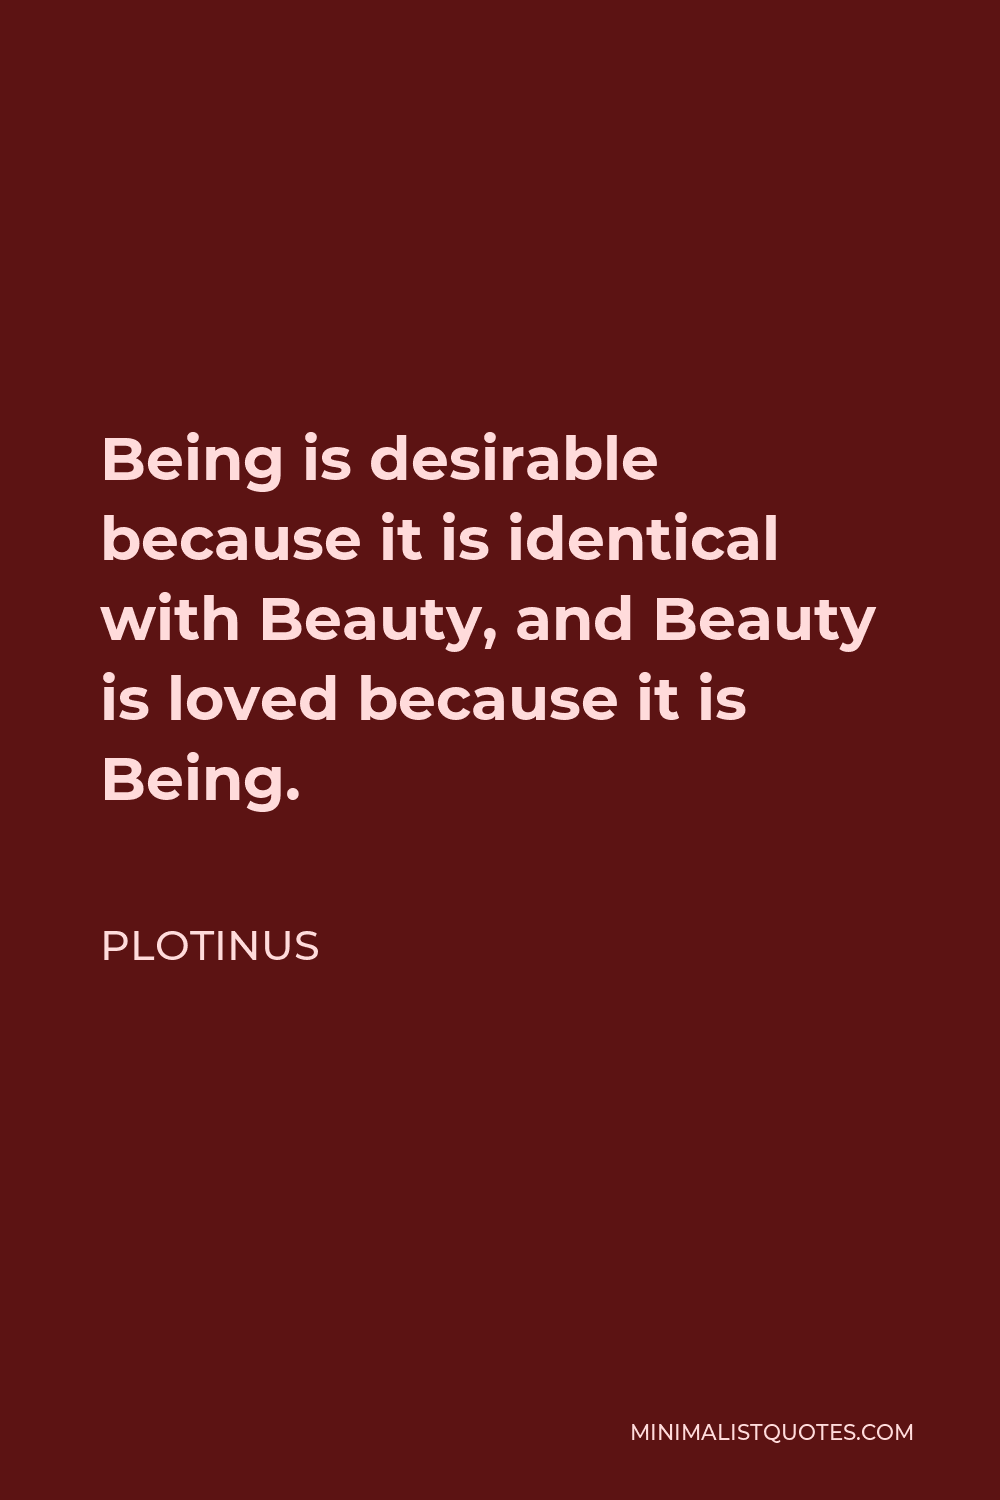 Plotinus Quote - Being is desirable because it is identical with Beauty, and Beauty is loved because it is Being.